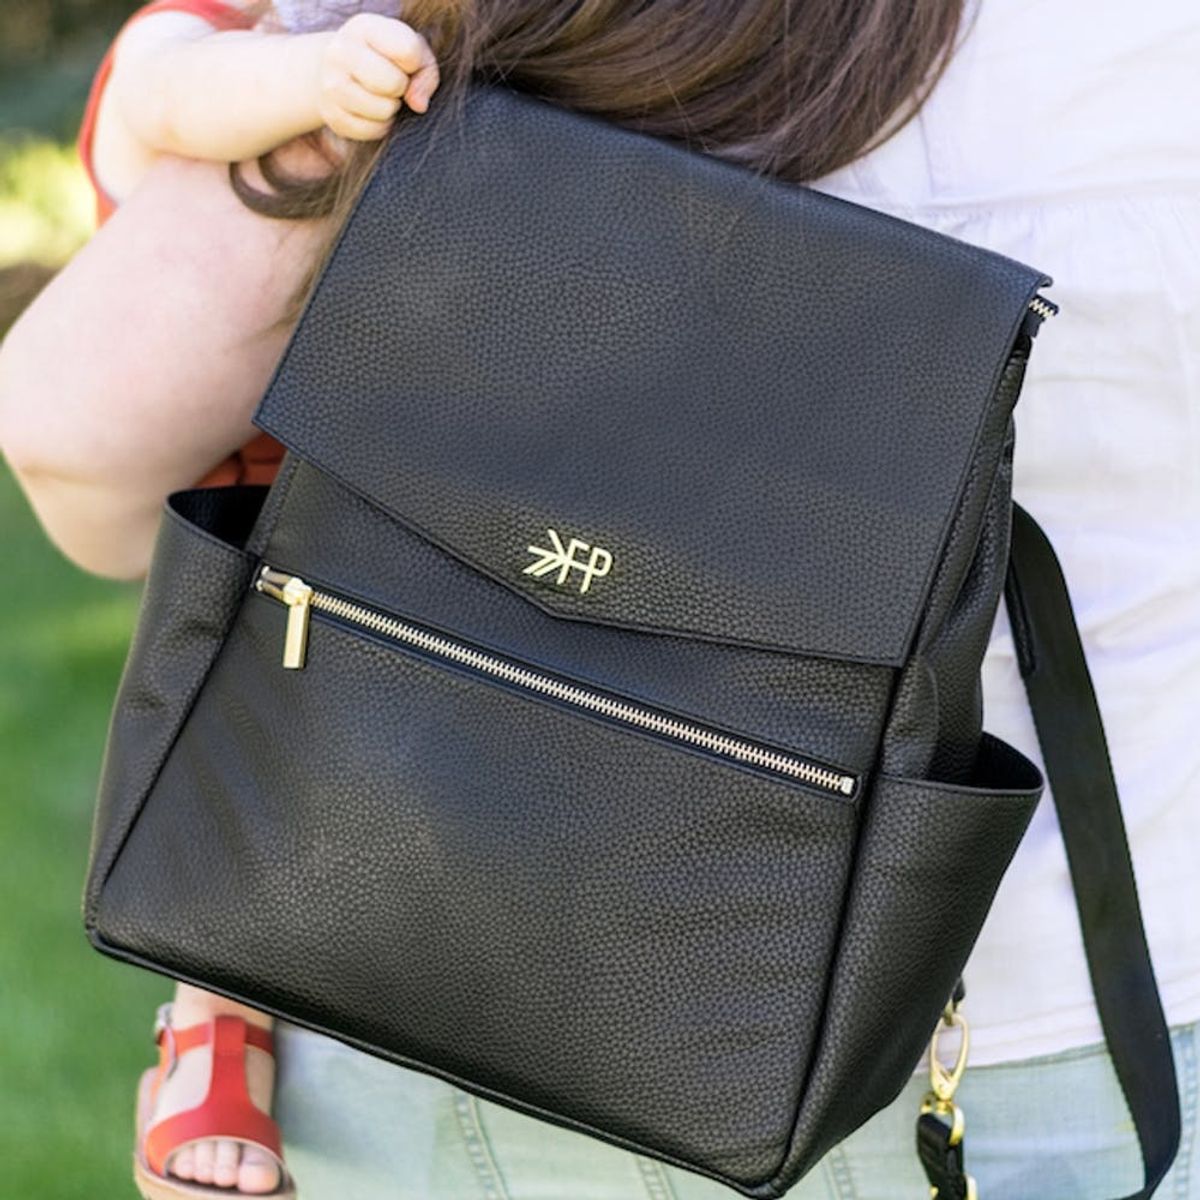 Freshly Picked Just Debuted the Diaper Bag That Even Gals Without Kids Will Want to Own